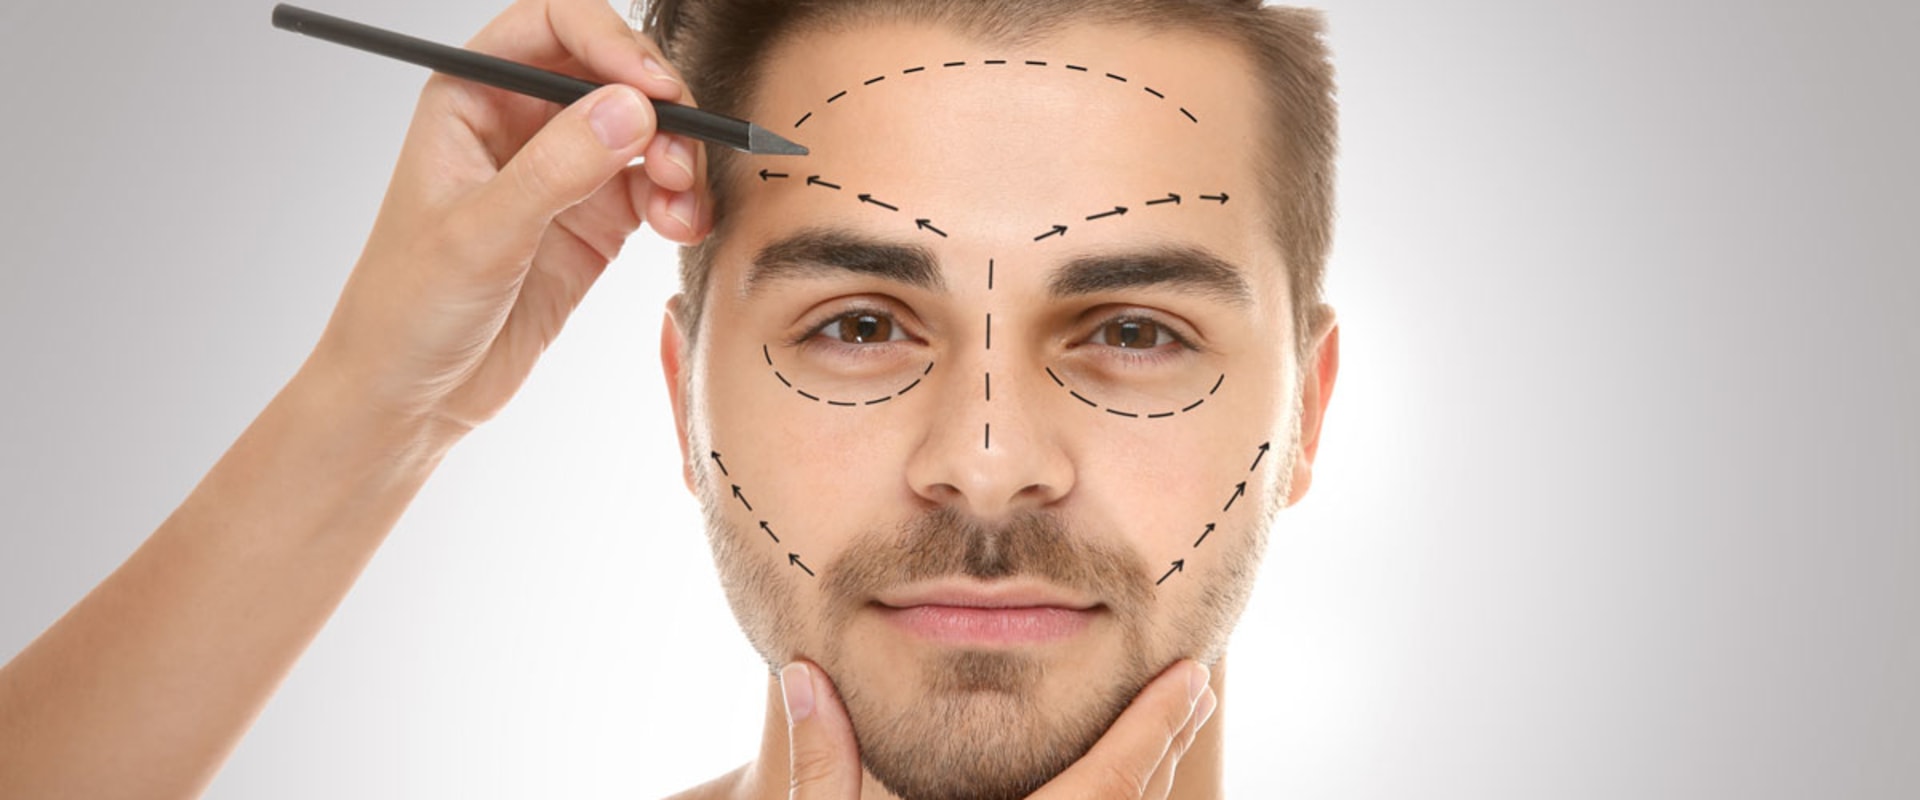 Does cosmetic surgery boost self-esteem?